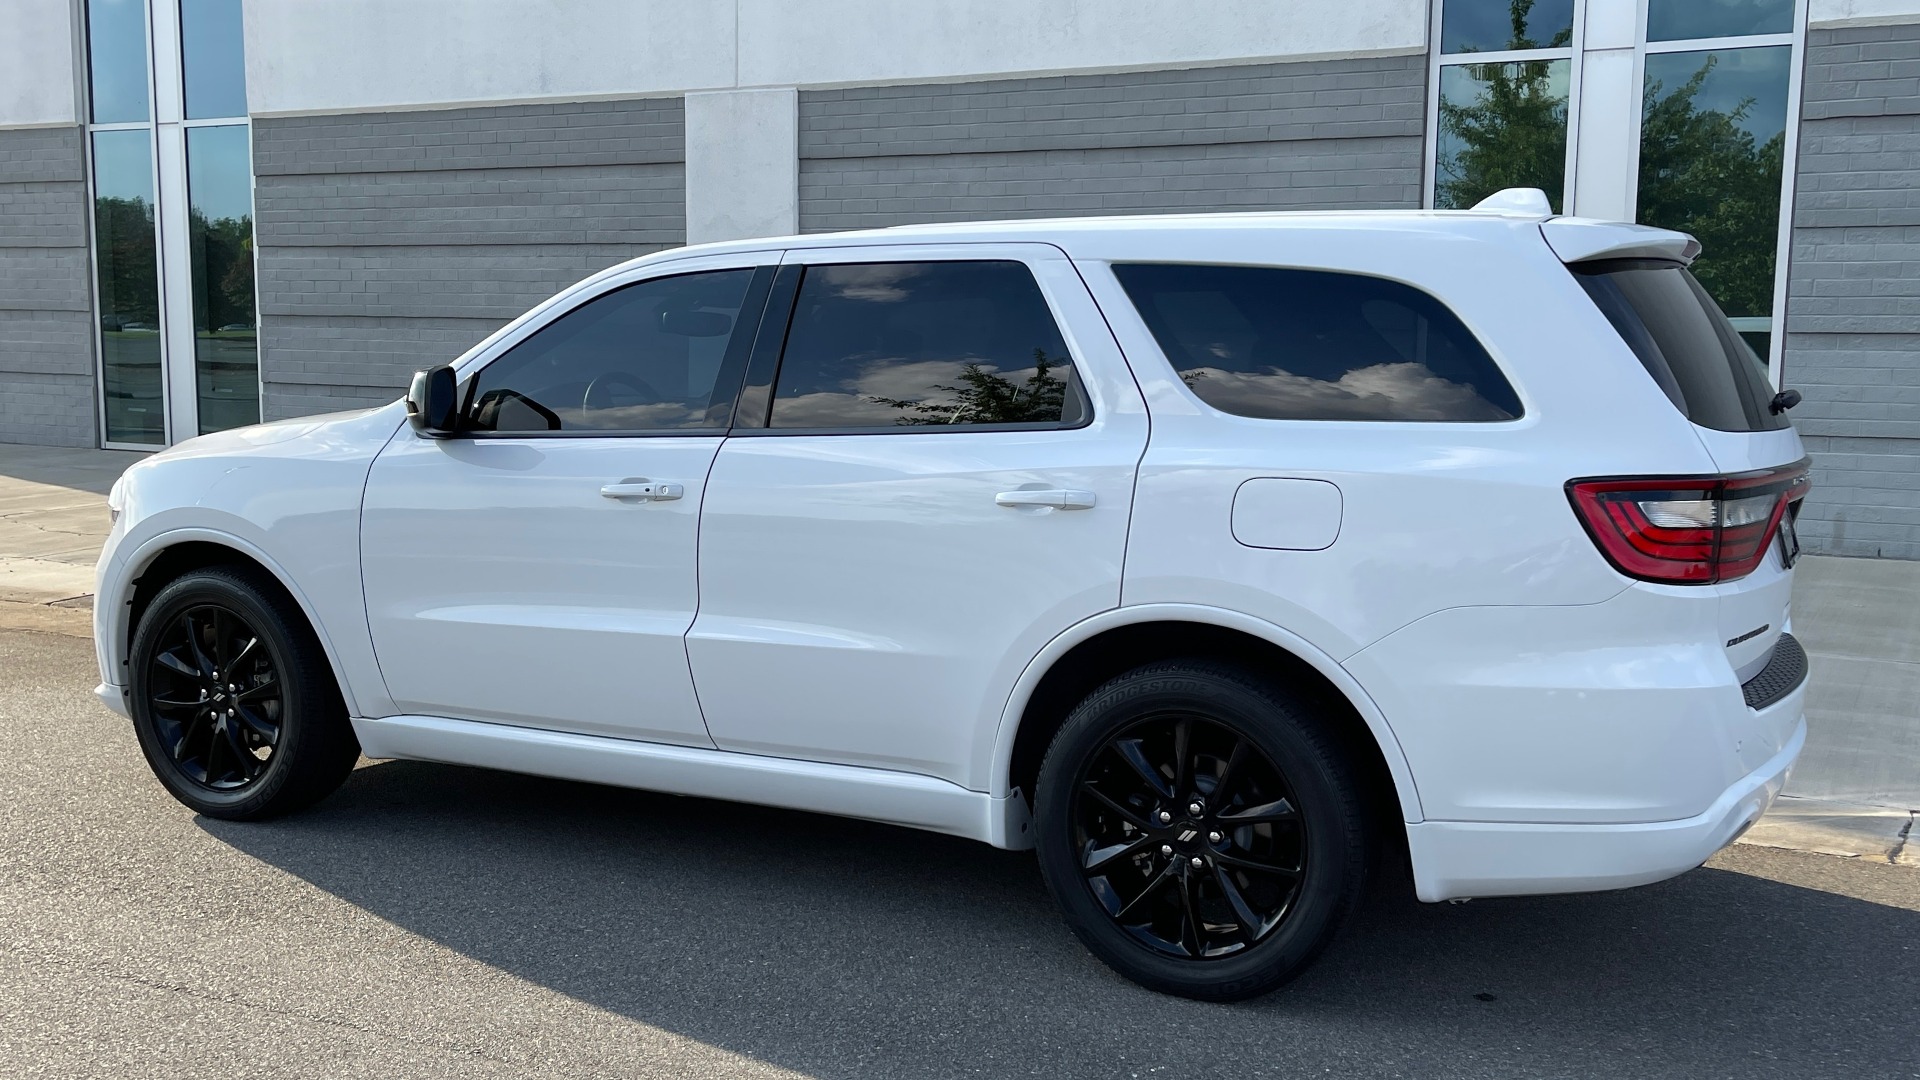 Used 2019 Dodge DURANGO GT BLACKTOP RWD / 3.6L / 8-SPD AUTO / 3-ROW / NAV / REARVIEW for sale Sold at Formula Imports in Charlotte NC 28227 5